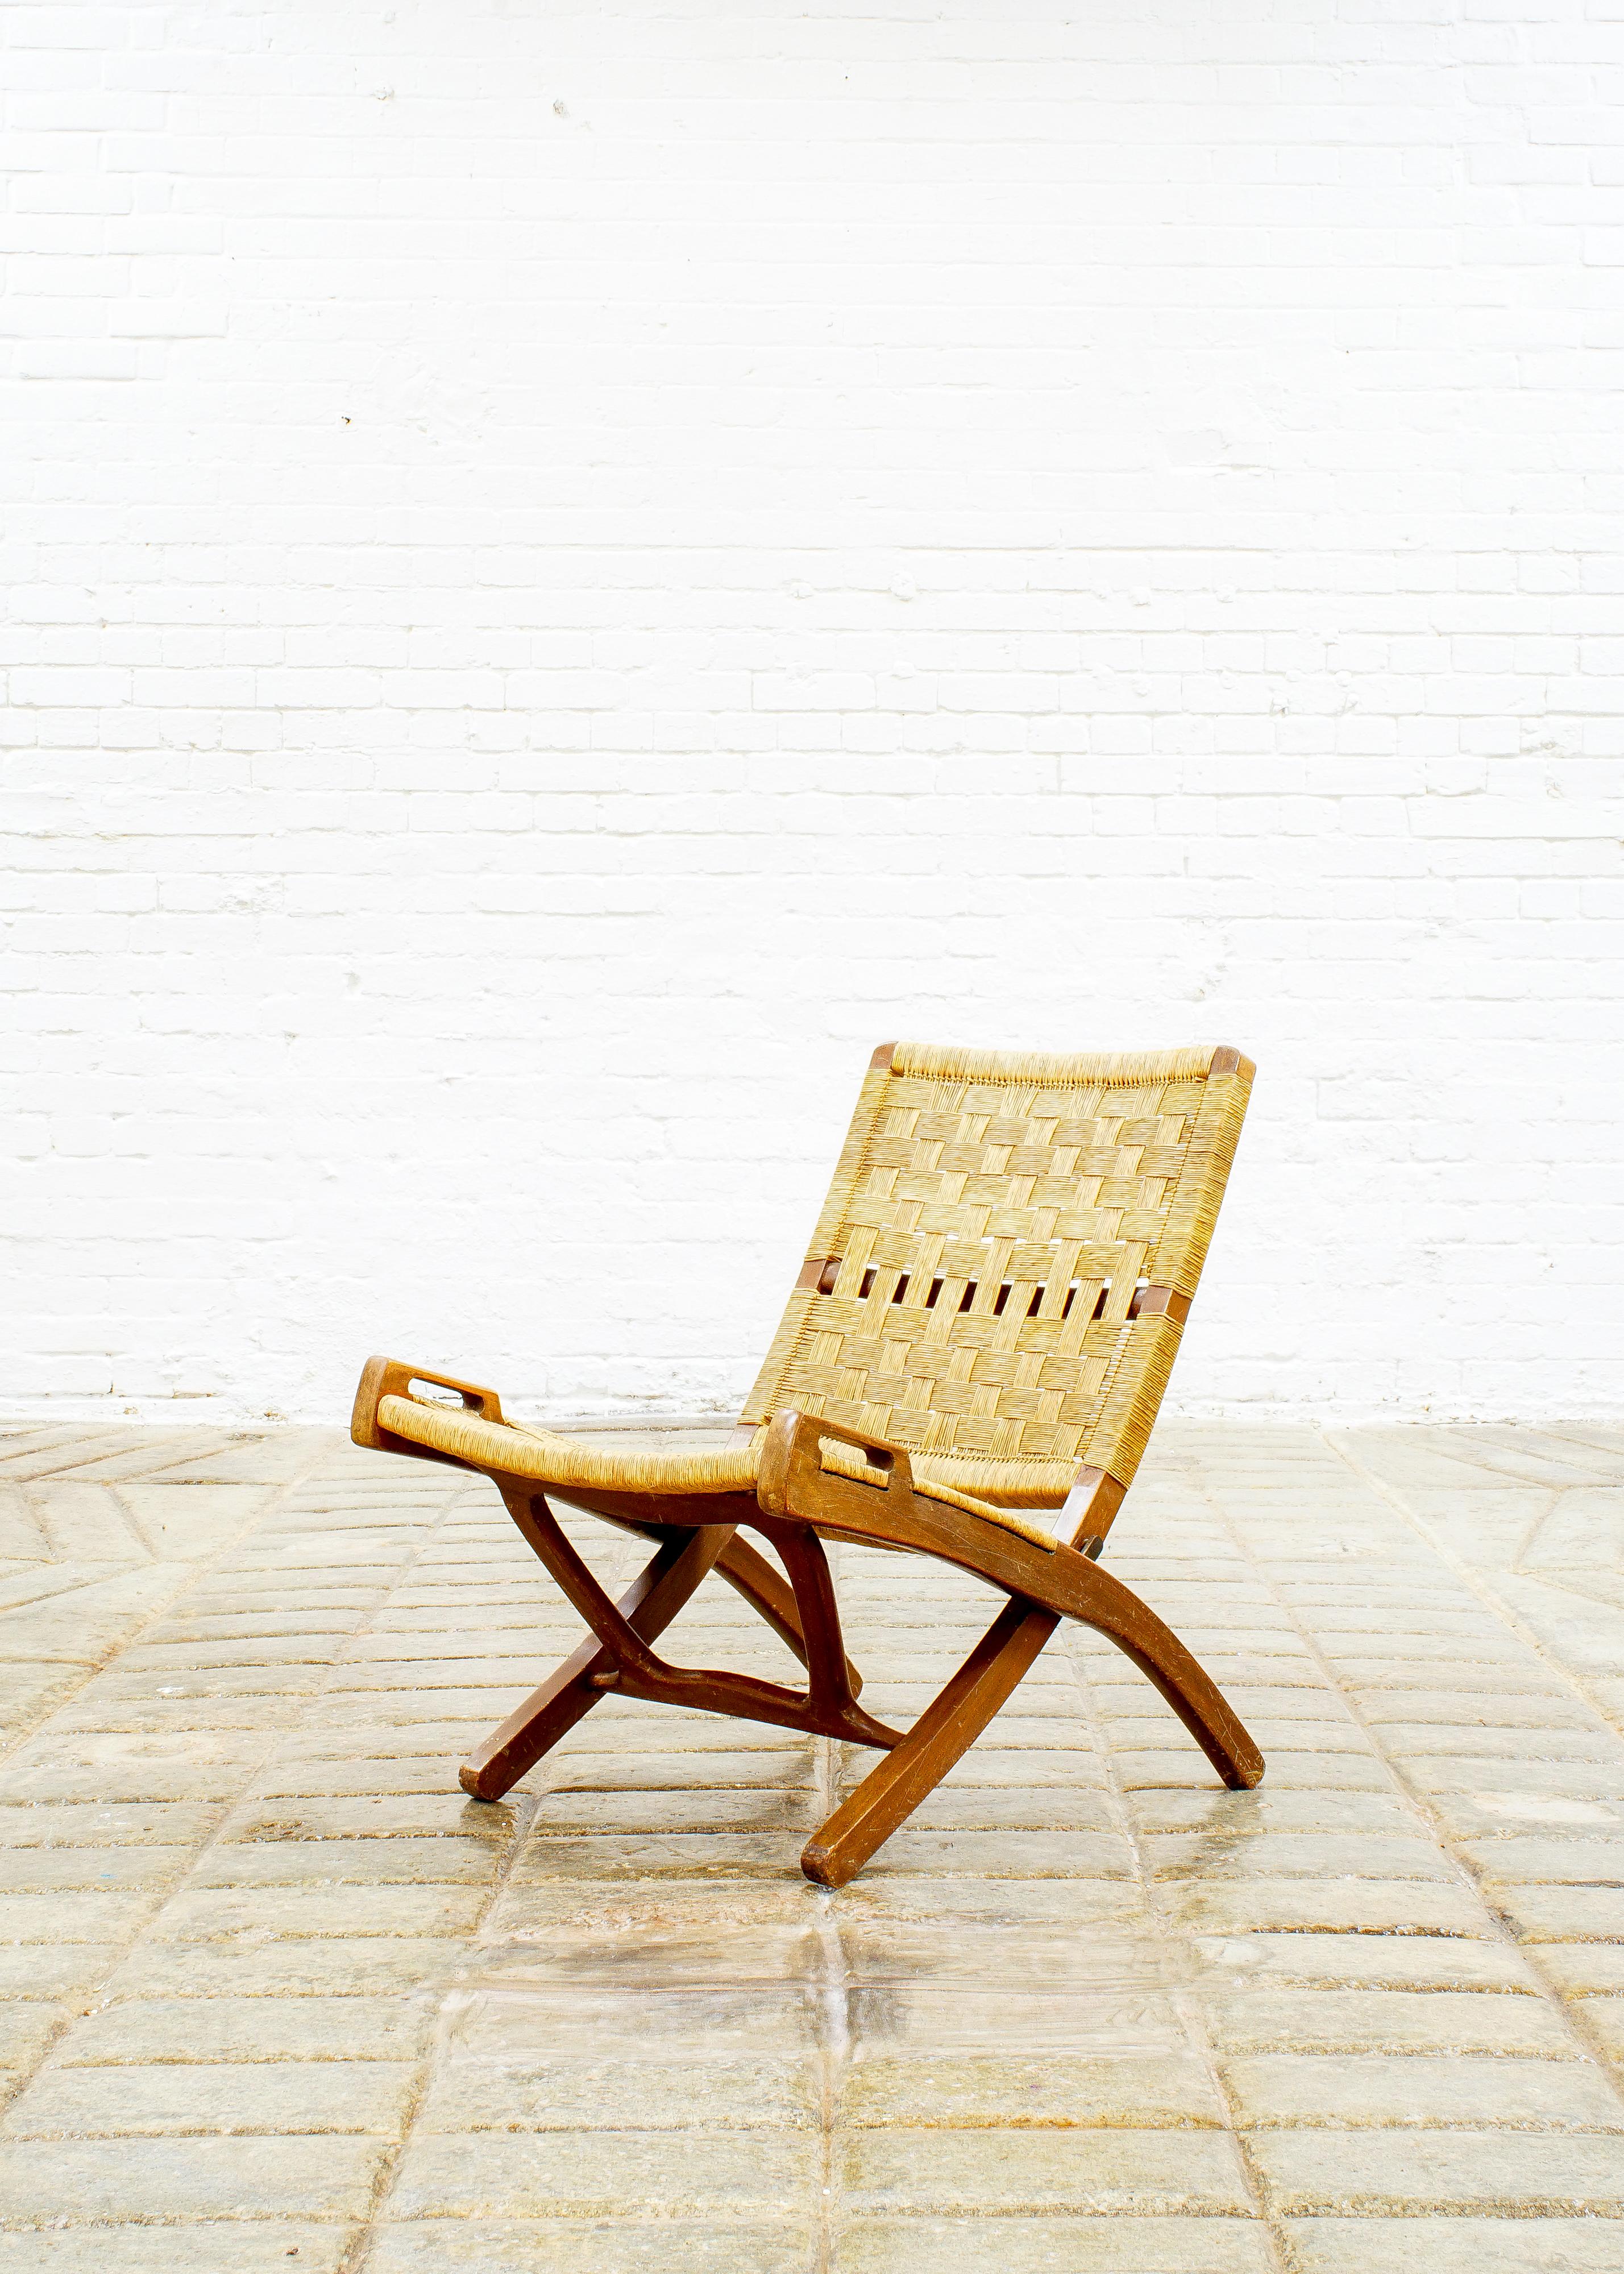 Fabulous folding armless lounge chair in oak and woven paper cord made after the JH512 midcentury chair by the famous Danish designer Hans Wegner. Nice brass fittings.
I believe this to be made in Yugoslavia, circa 1970.